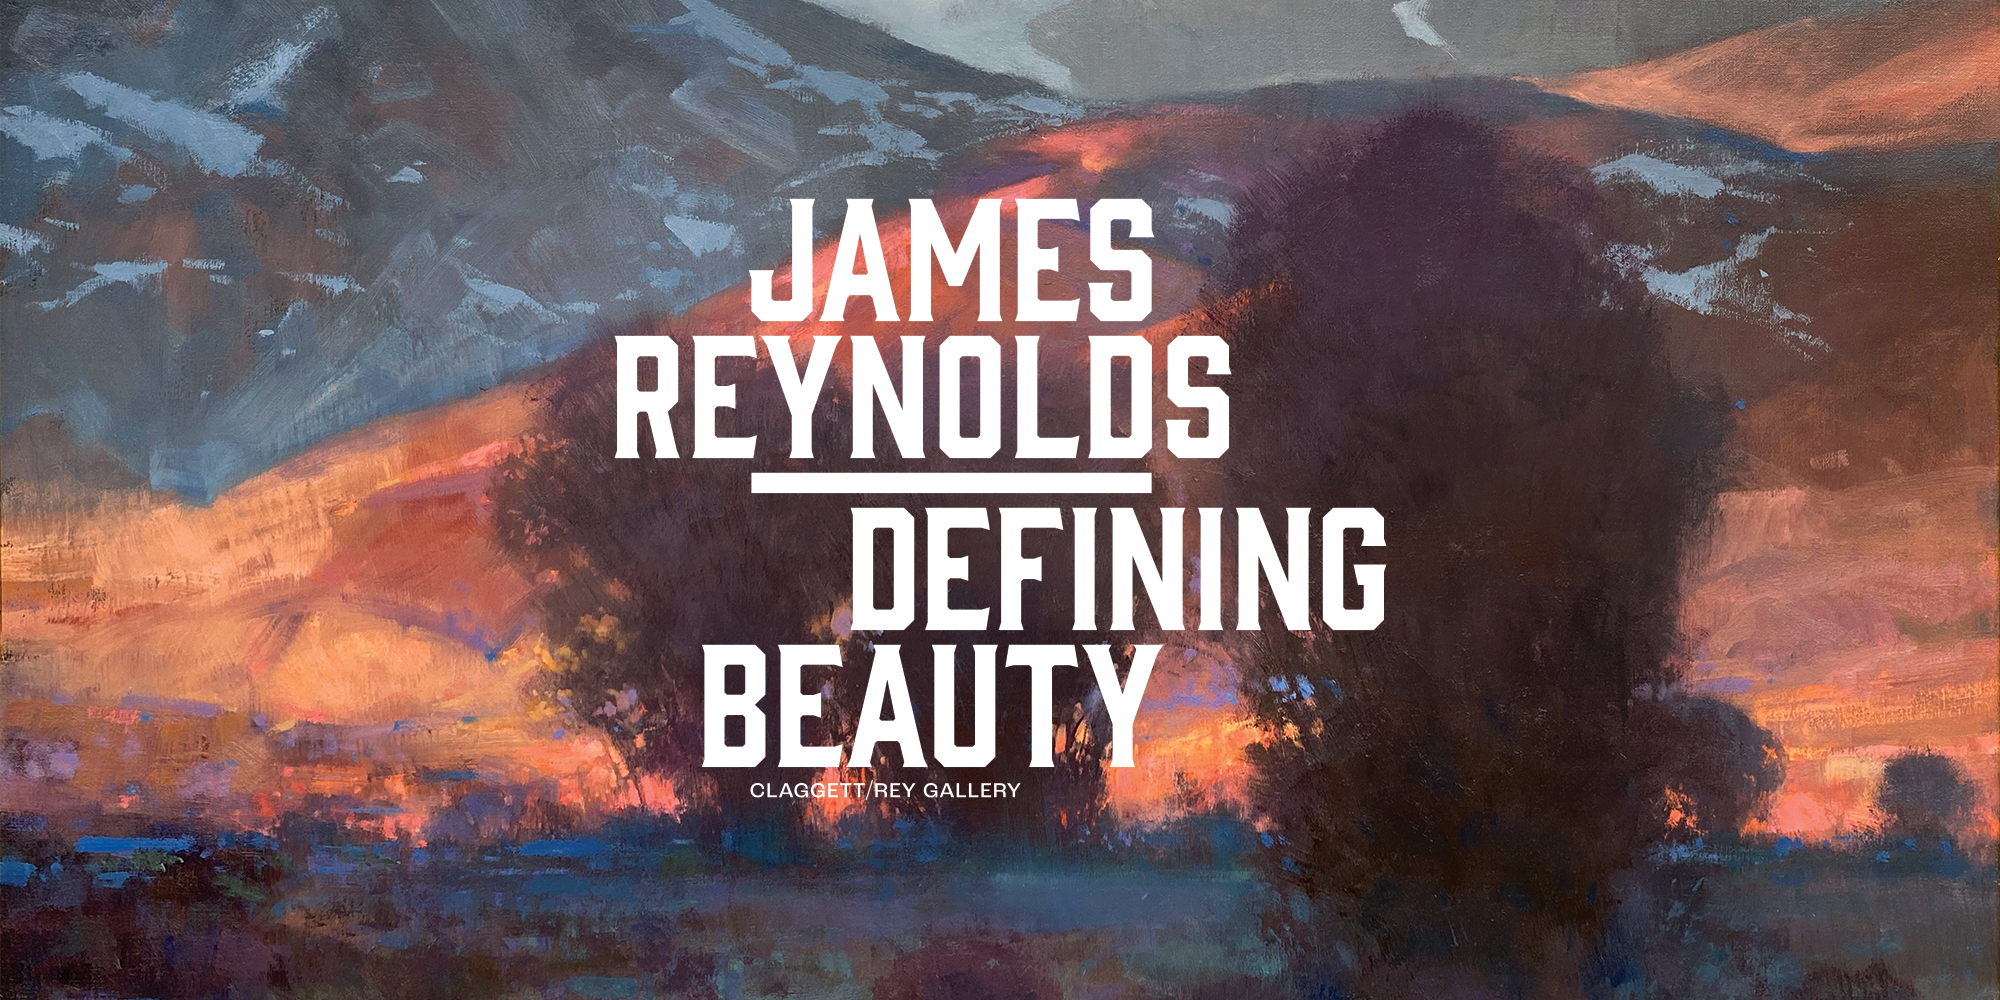 The type lock up used to promote James Reynolds: Defining Beauty.